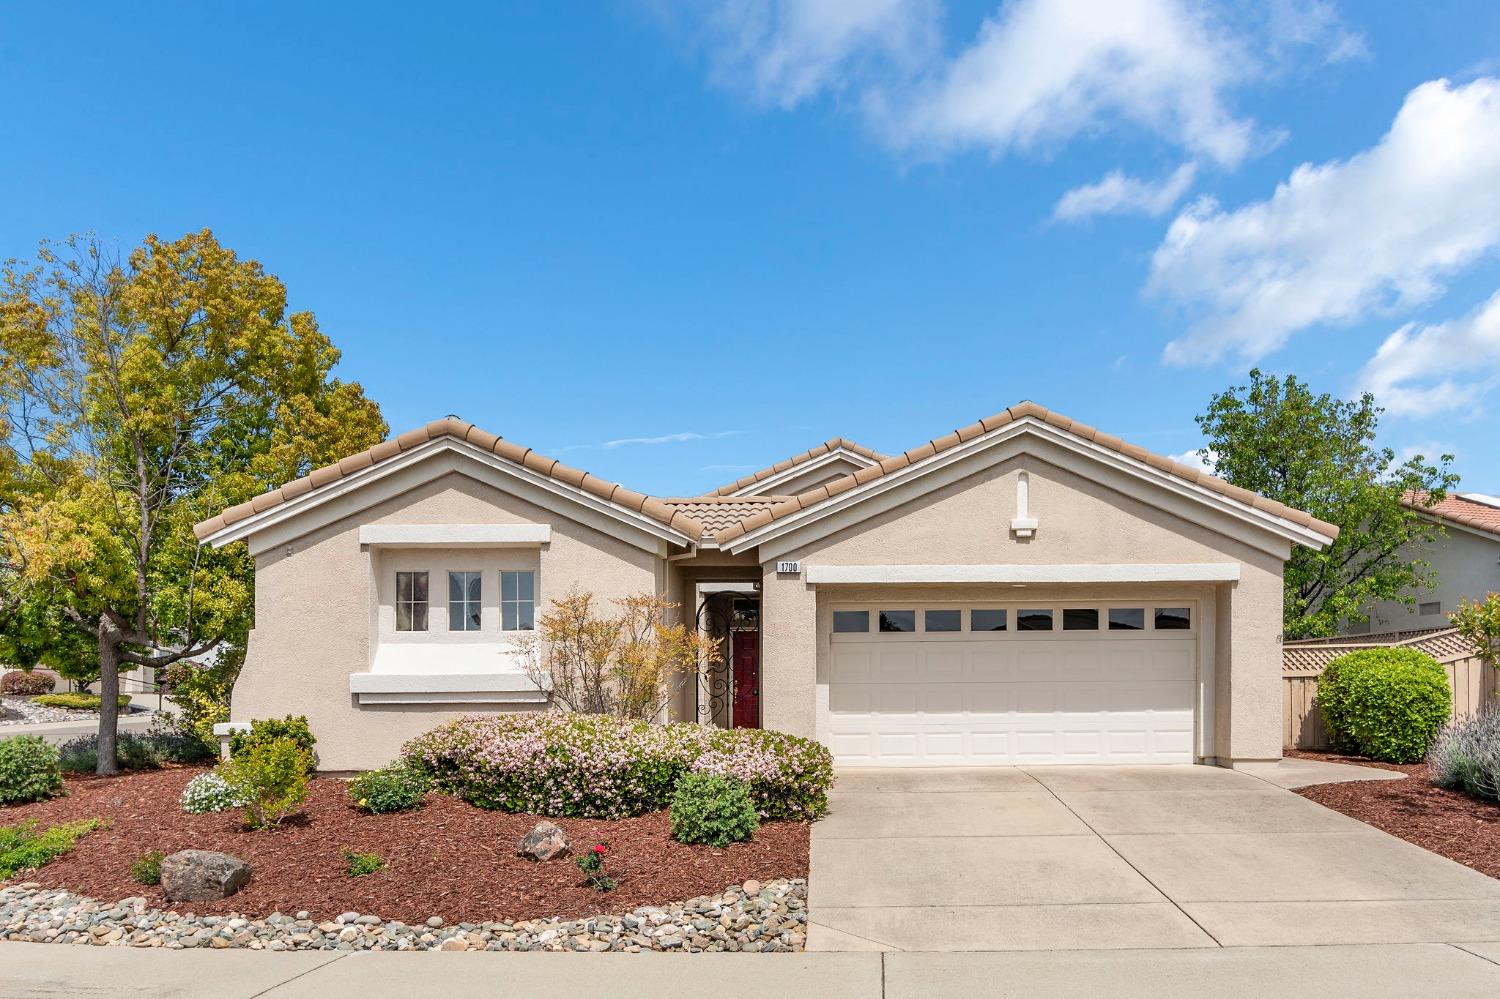 Photo of 1700 Starview Ln in Lincoln, CA